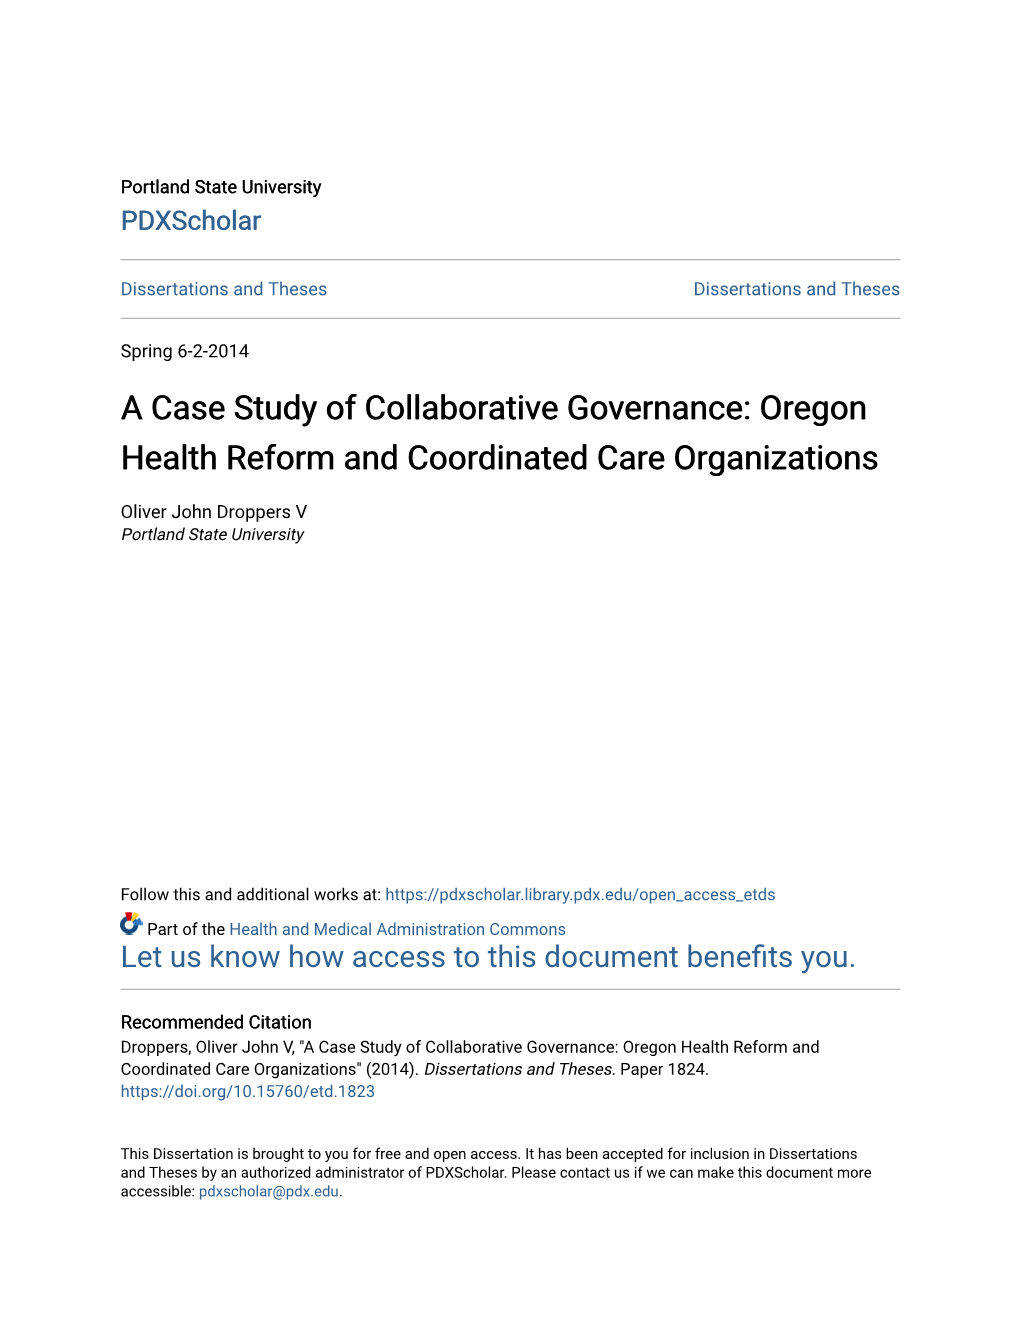 A Case Study of Collaborative Governance: Oregon Health Reform and Coordinated Care Organizations